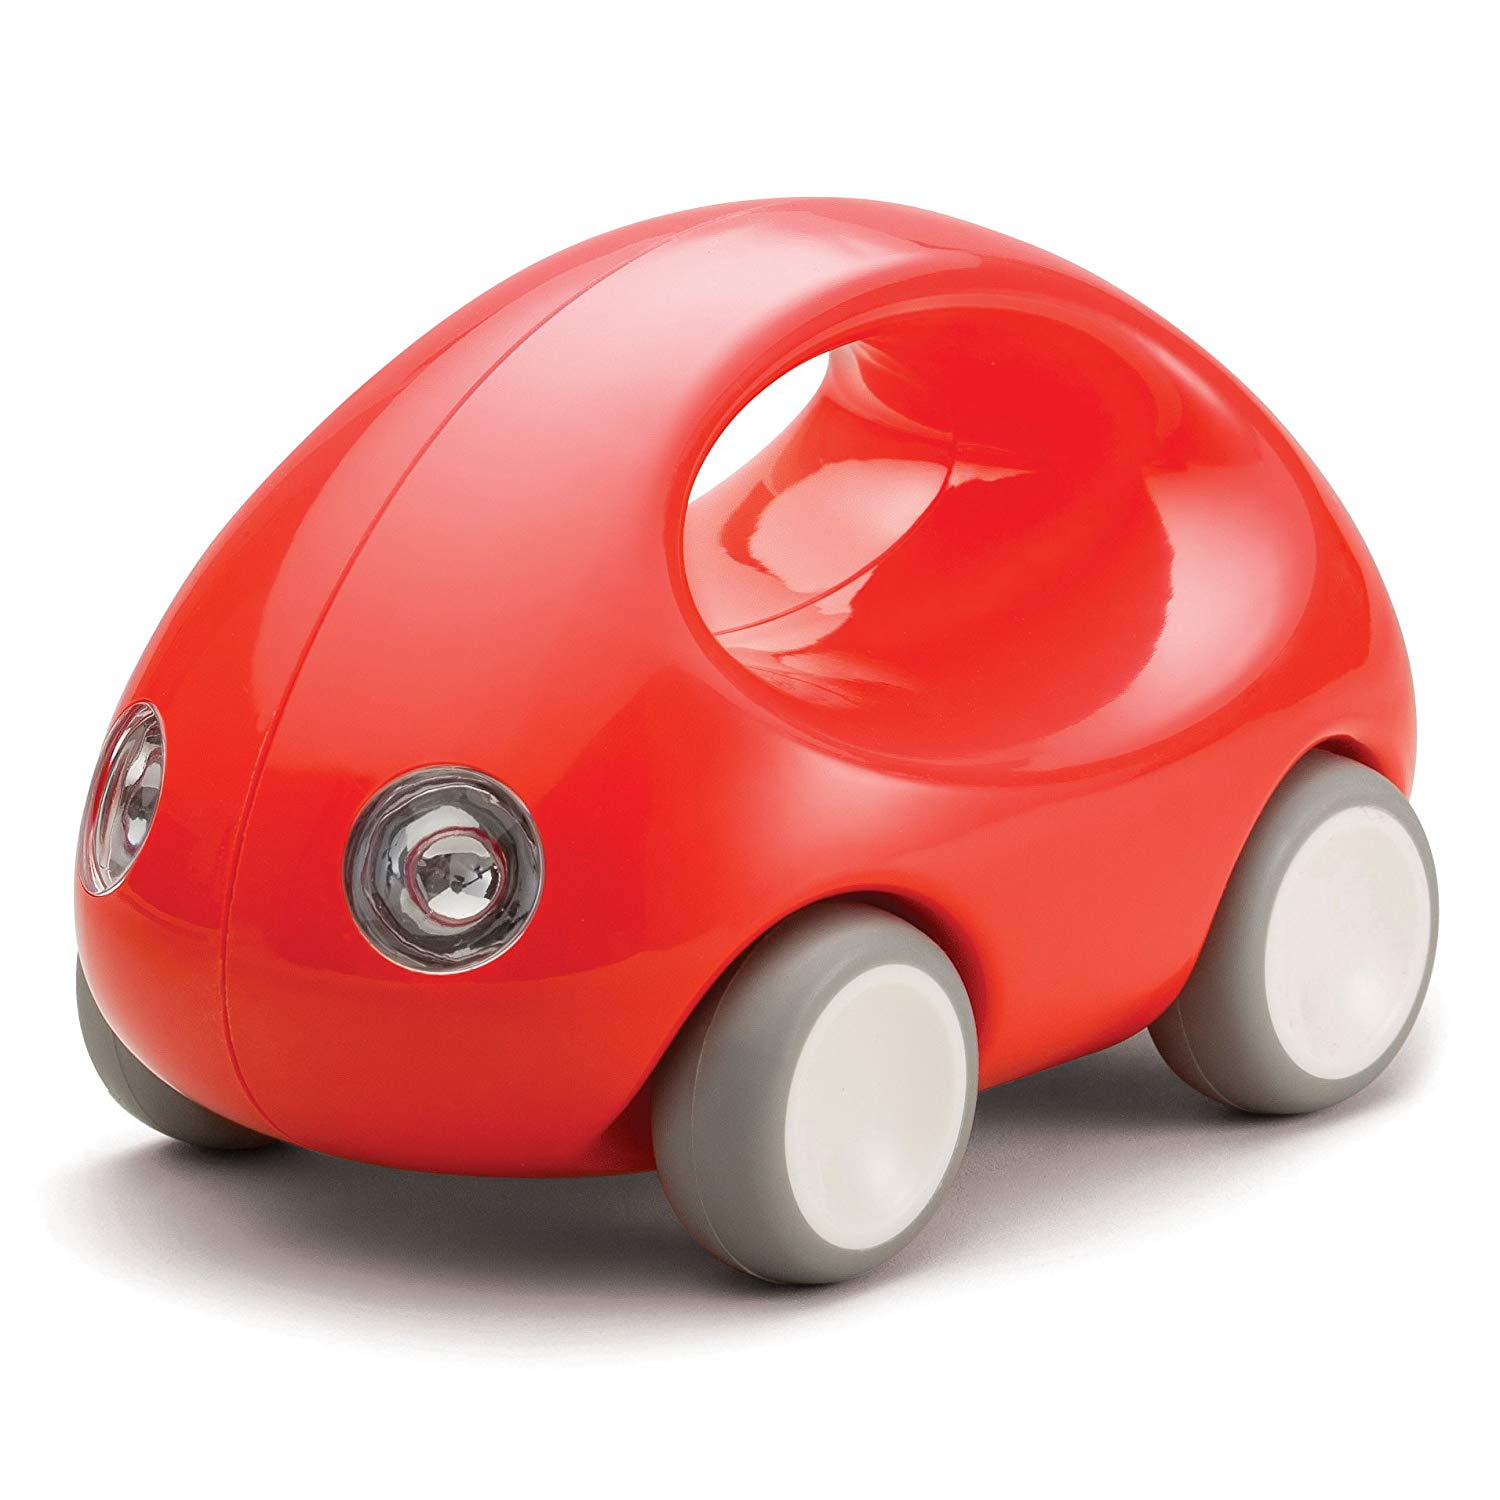 Amazon.com: Kid O Go Car Early Learning Push & Pull Toy - Red: Toys ...